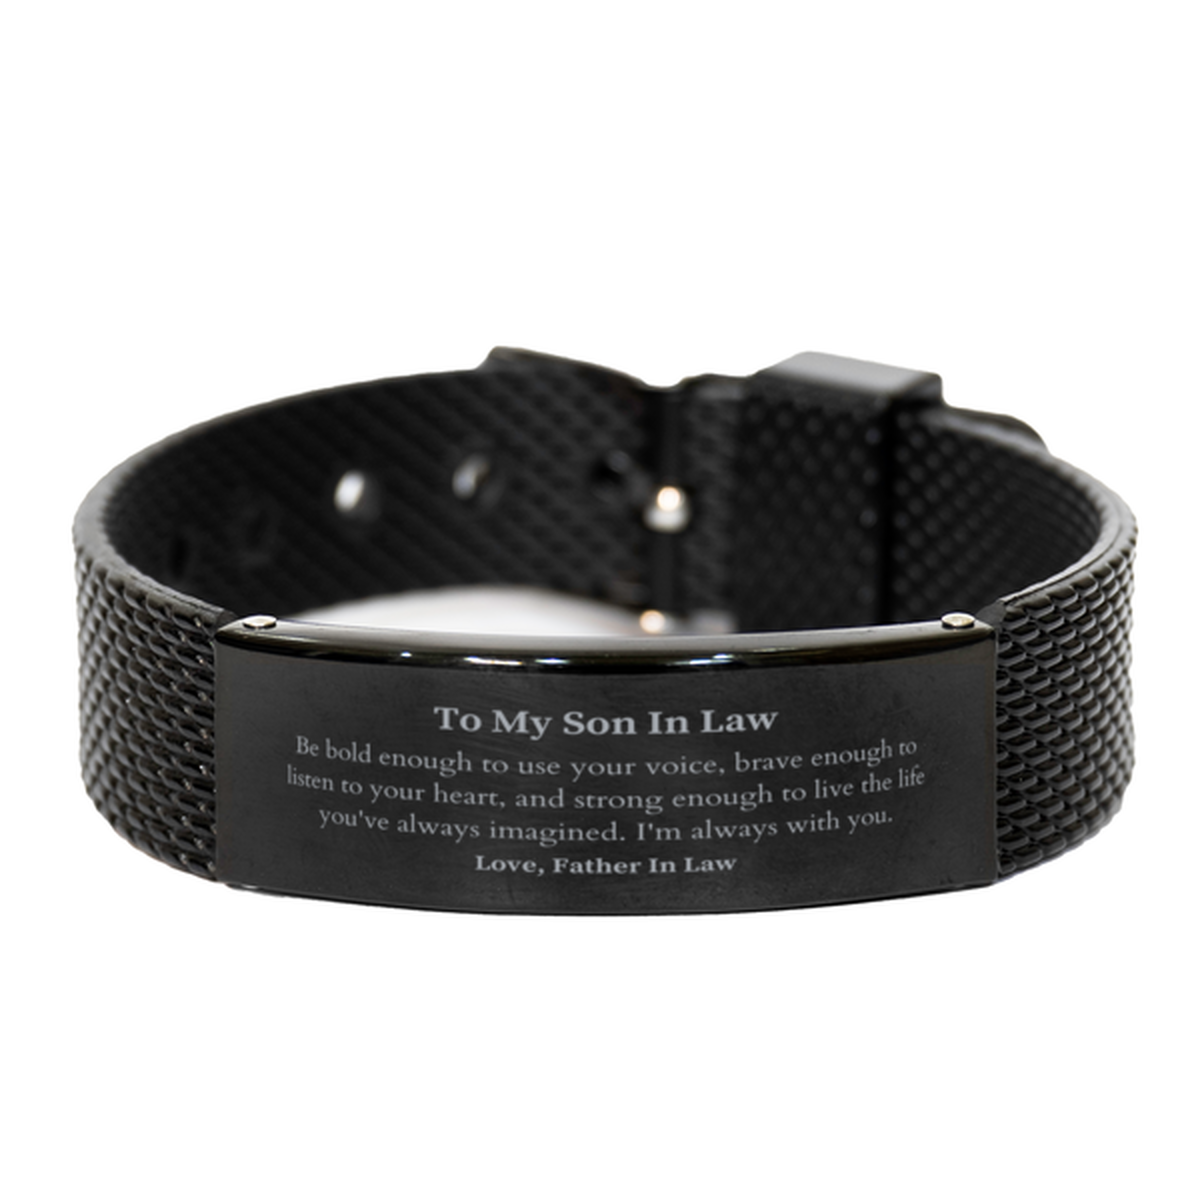 Keepsake Son In Law Black Shark Mesh Bracelet Gift Idea Graduation Christmas Birthday Son In Law from Father In Law, Son In Law Be bold enough to use your voice, brave enough to listen to your heart. Love, Father In Law